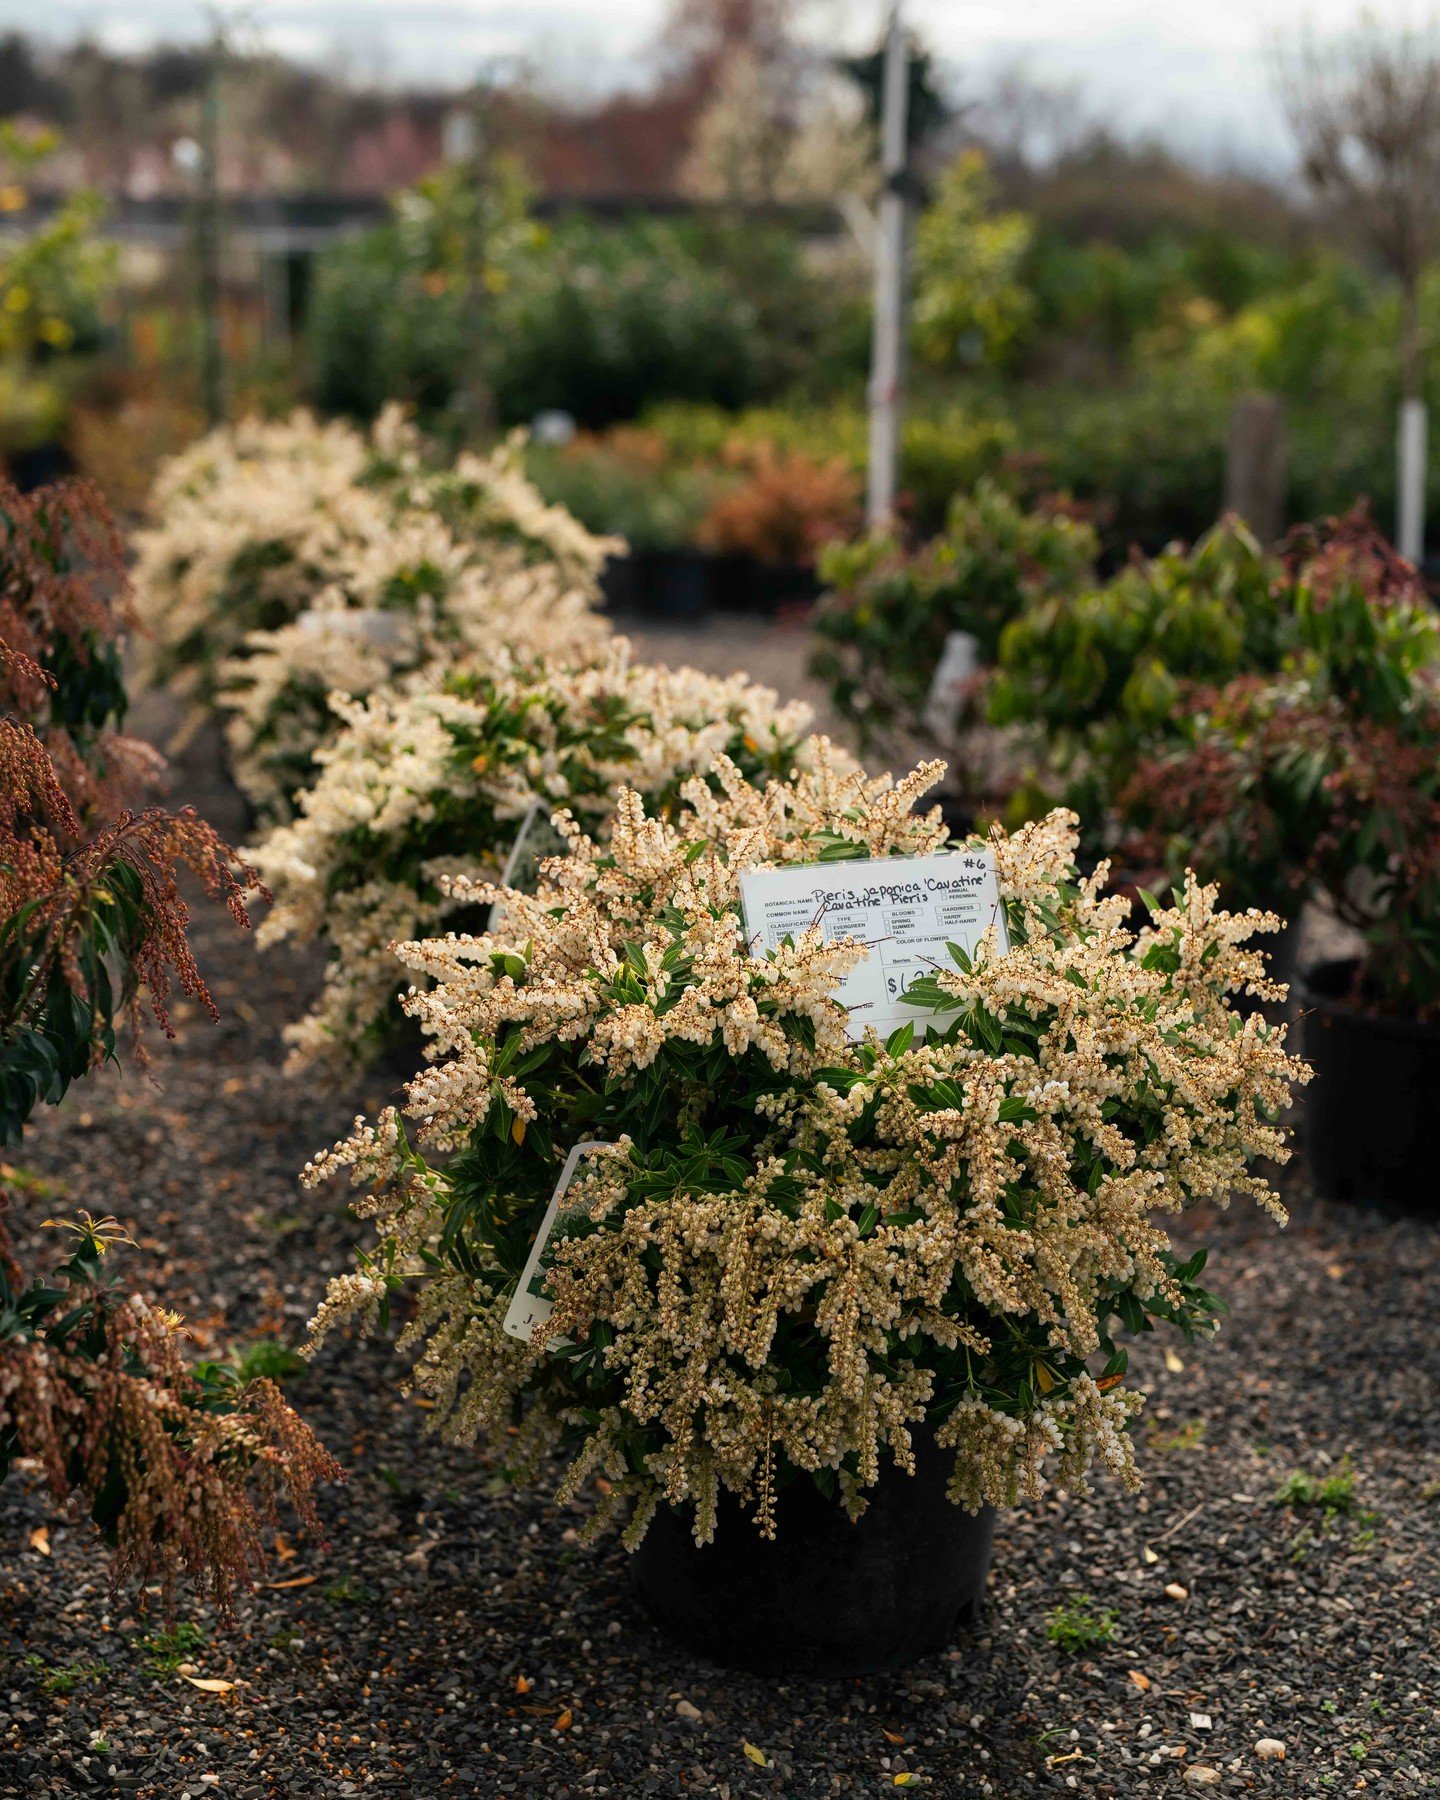 Cavatine Pieris, also known as Andromeda 'Cavatine,' is a compact evergreen shrub with beautiful white flowers in spring, perfect for adding charm to any garden or landscape!

Available at our Nursery - Add this beauty to your garden today! #Mayfield